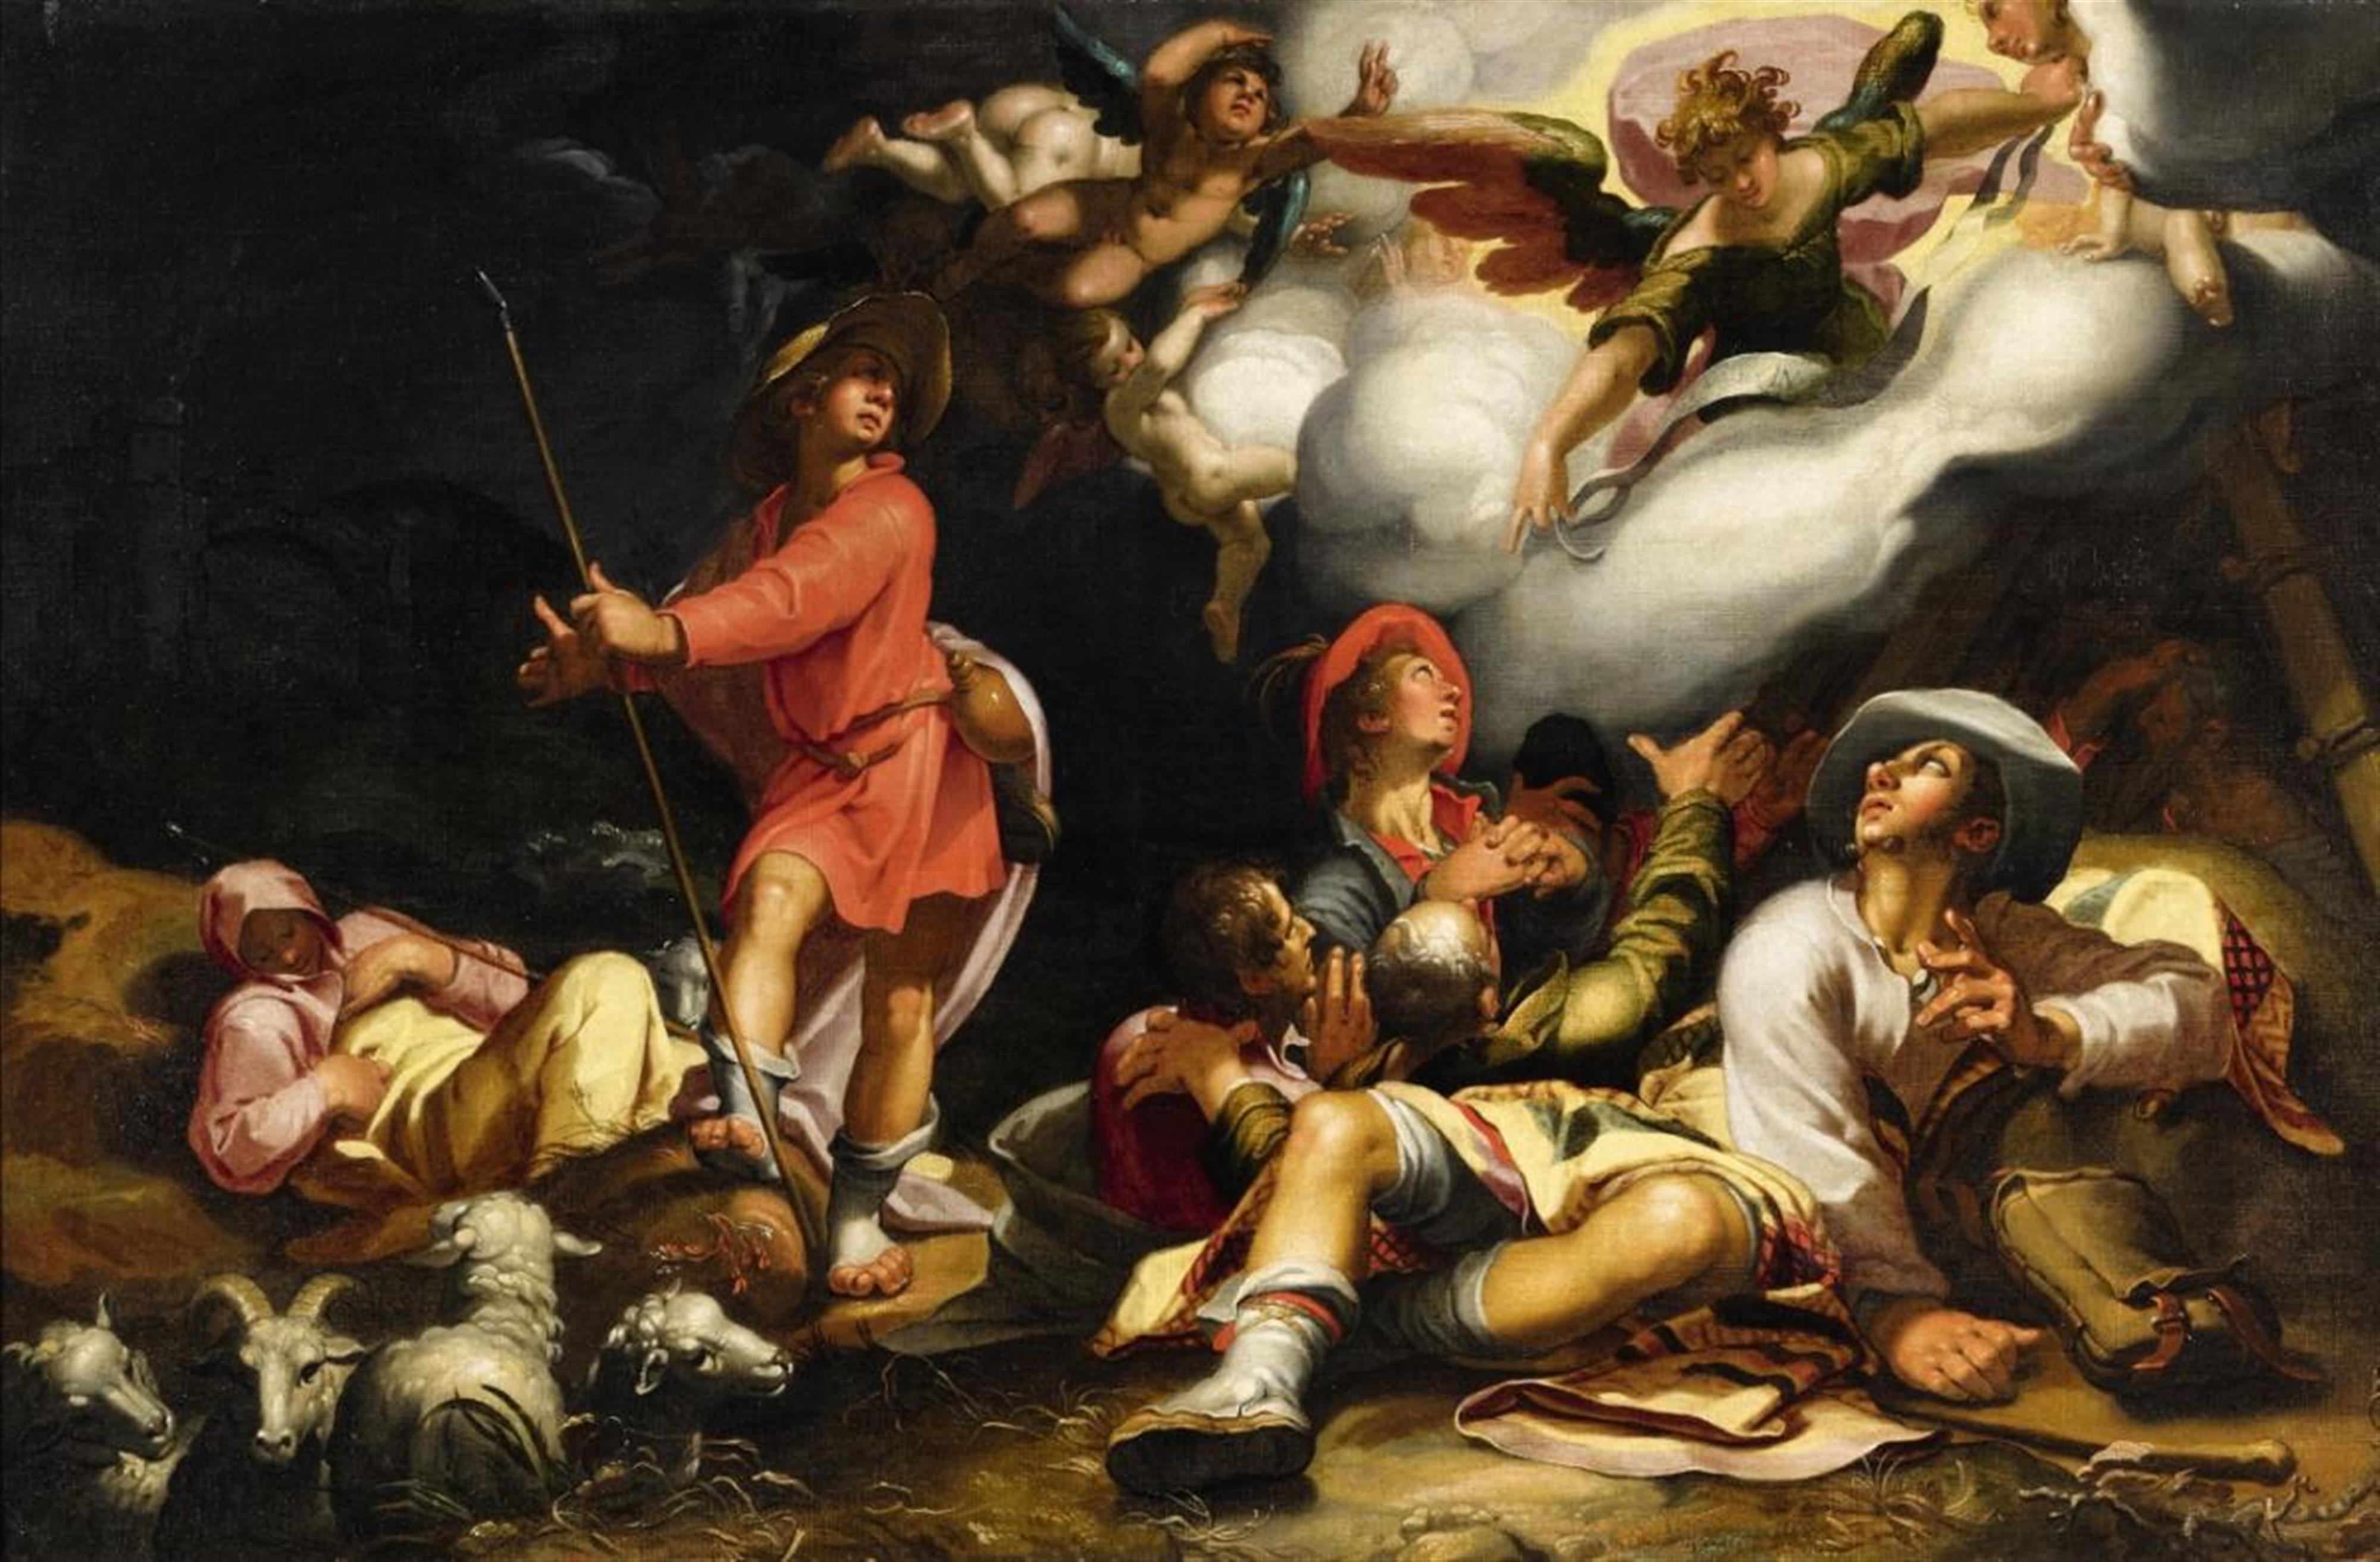 Abraham Bloemaert - The Annunciation to the Shepherds - image-1